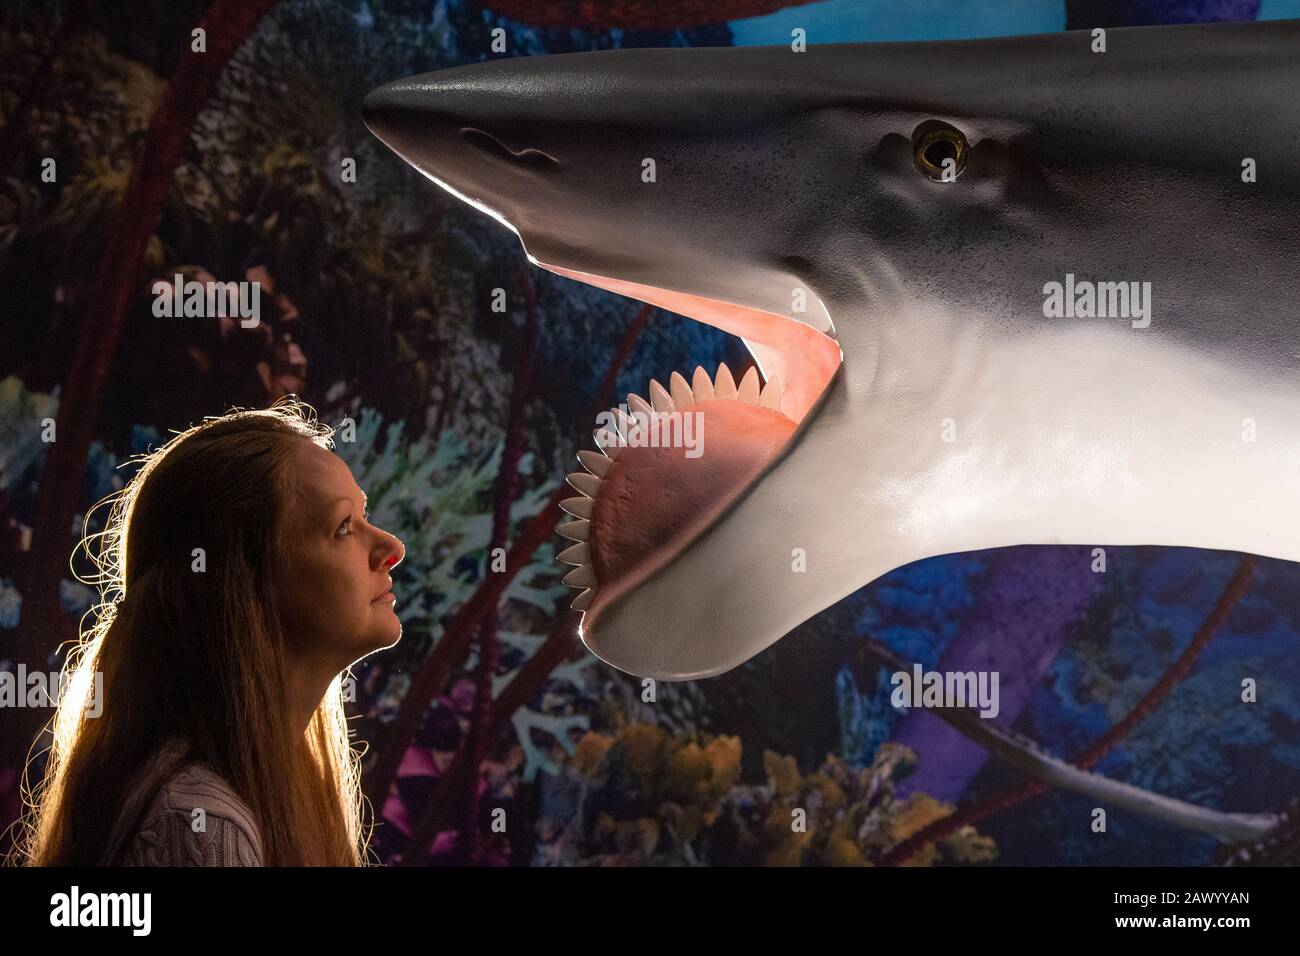 Deputy Keeper of Natural History Dr Emma Nicholls views a model of a Helicoprion, a spiral-toothed shark, during the preview for the Horniman Museum's 'Permian Monsters: Life Before the Dinosaurs' exhibition in south London. Stock Photo